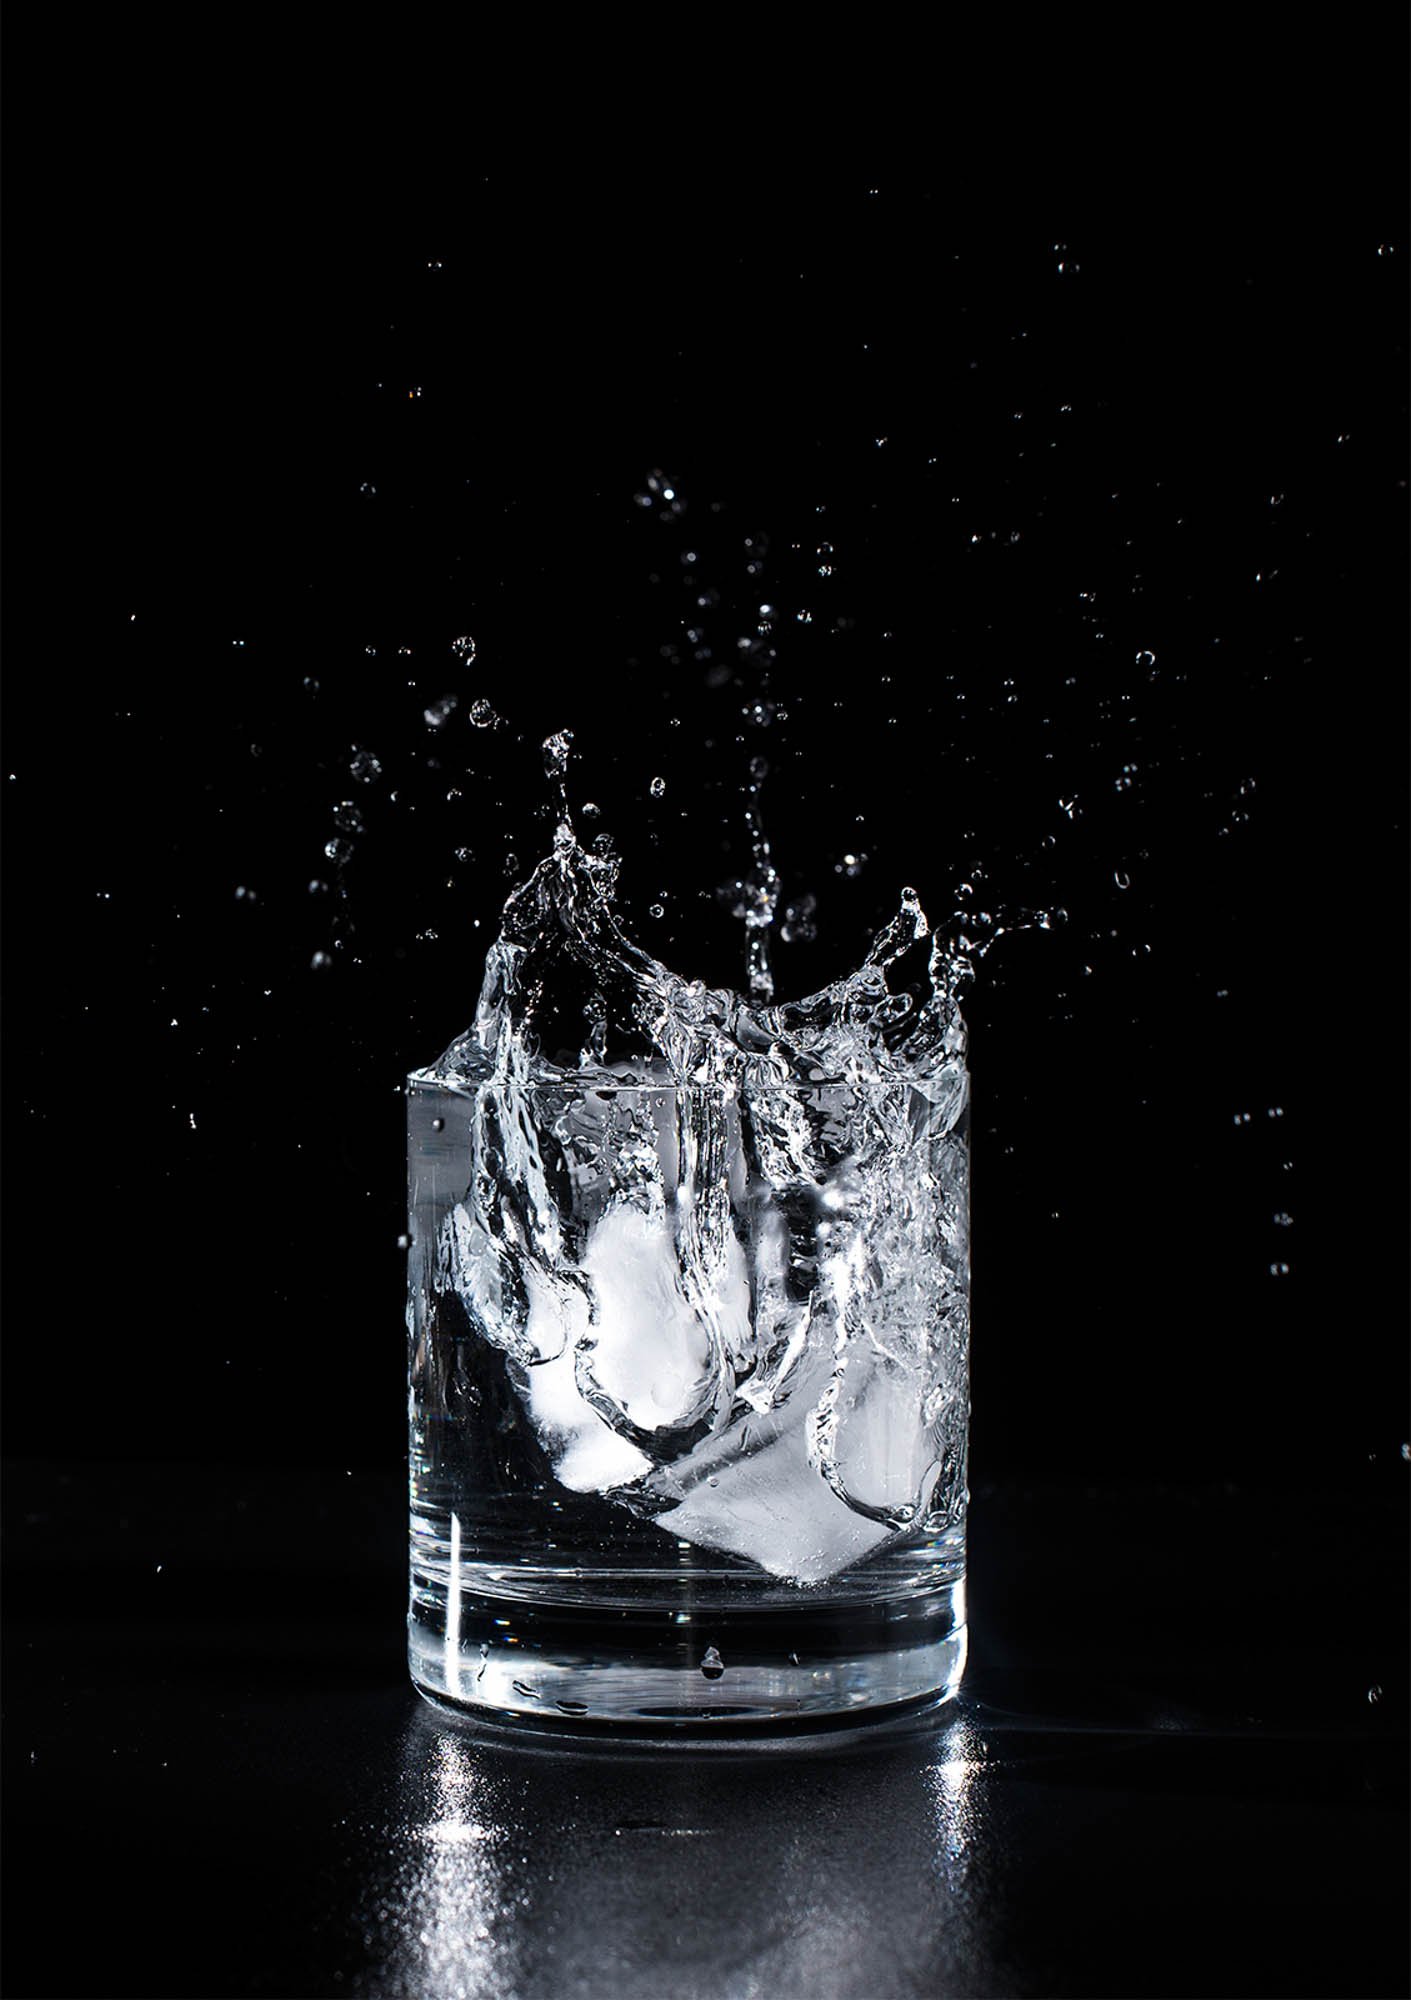 A color photo by Cayla Zahoran of ice splashing into a rocks glass full of water against a black background.